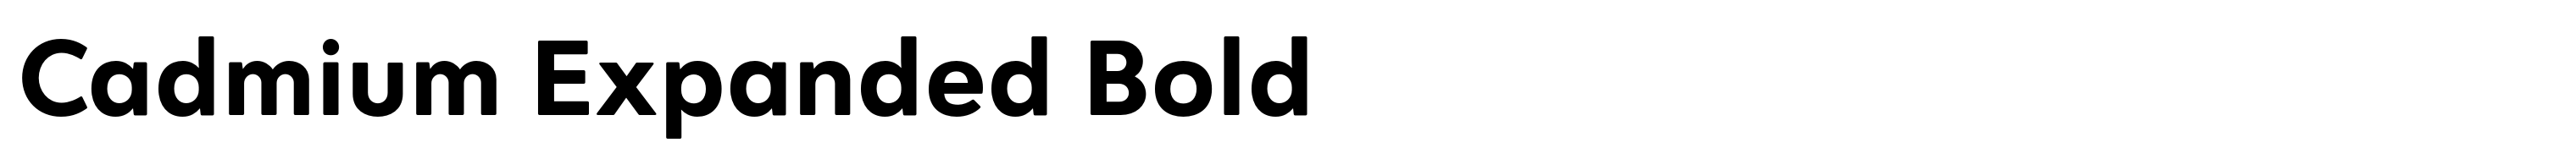 Cadmium Expanded Bold